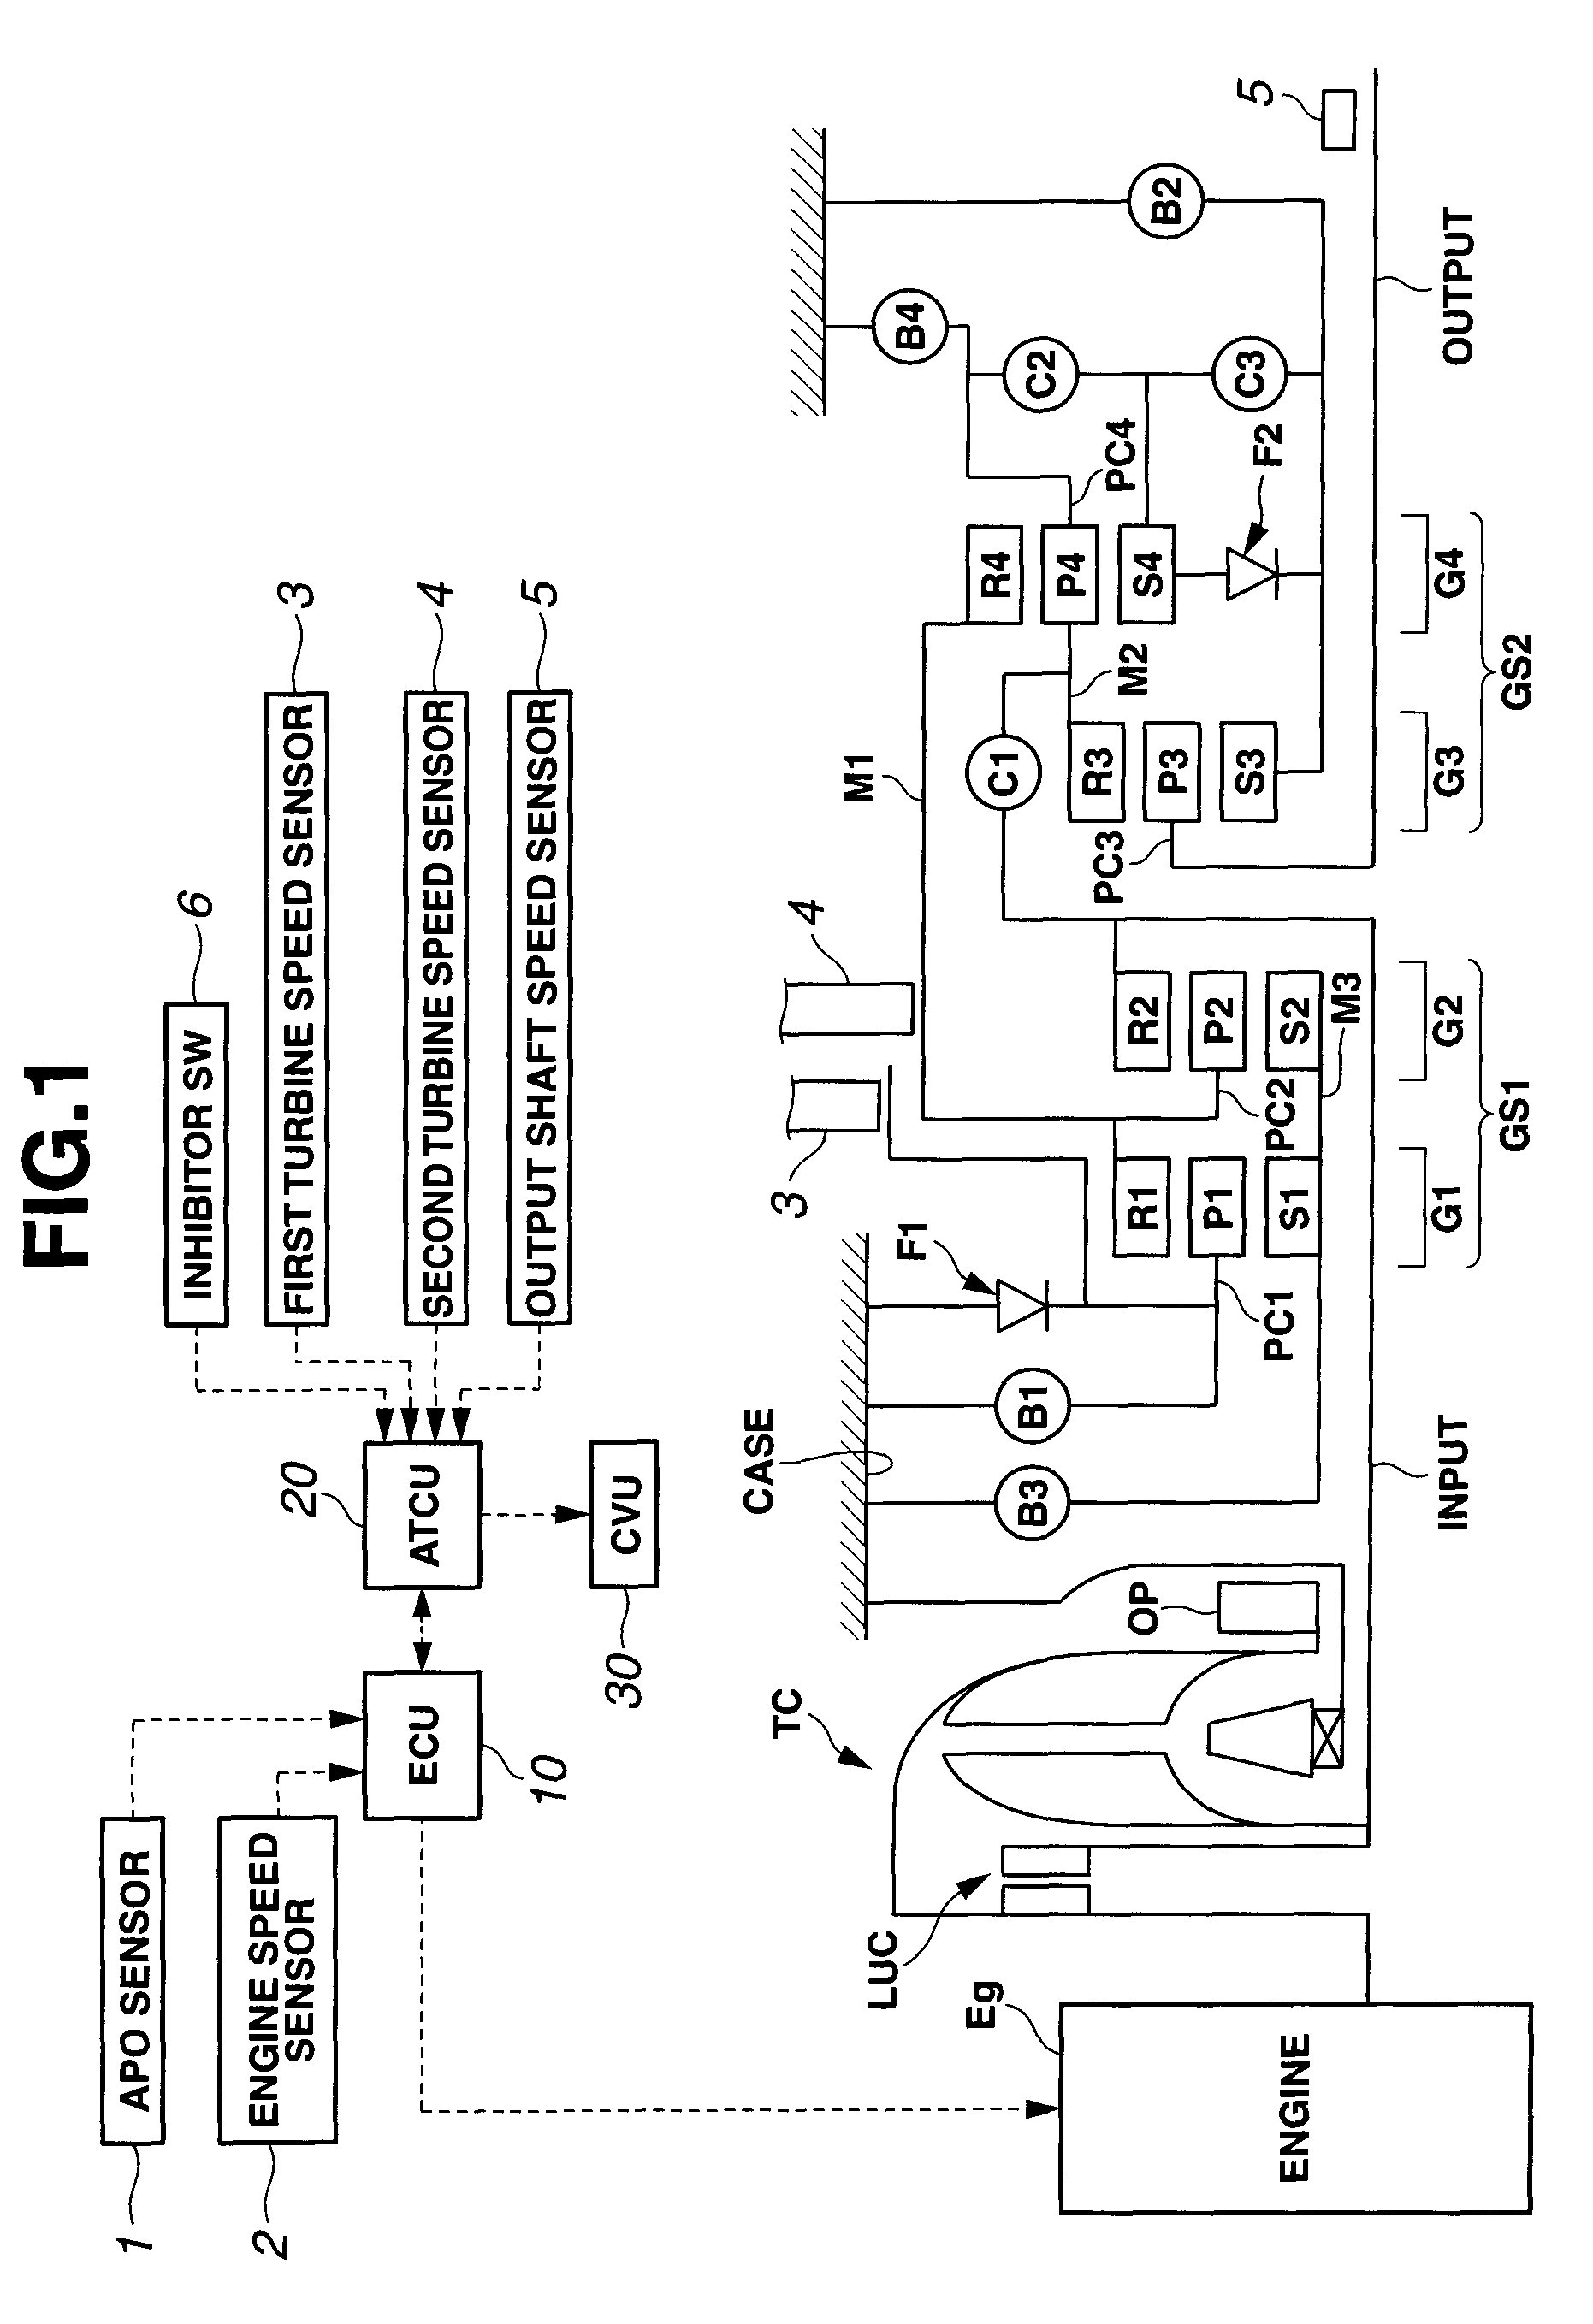 Speed change control system of automatic transmission